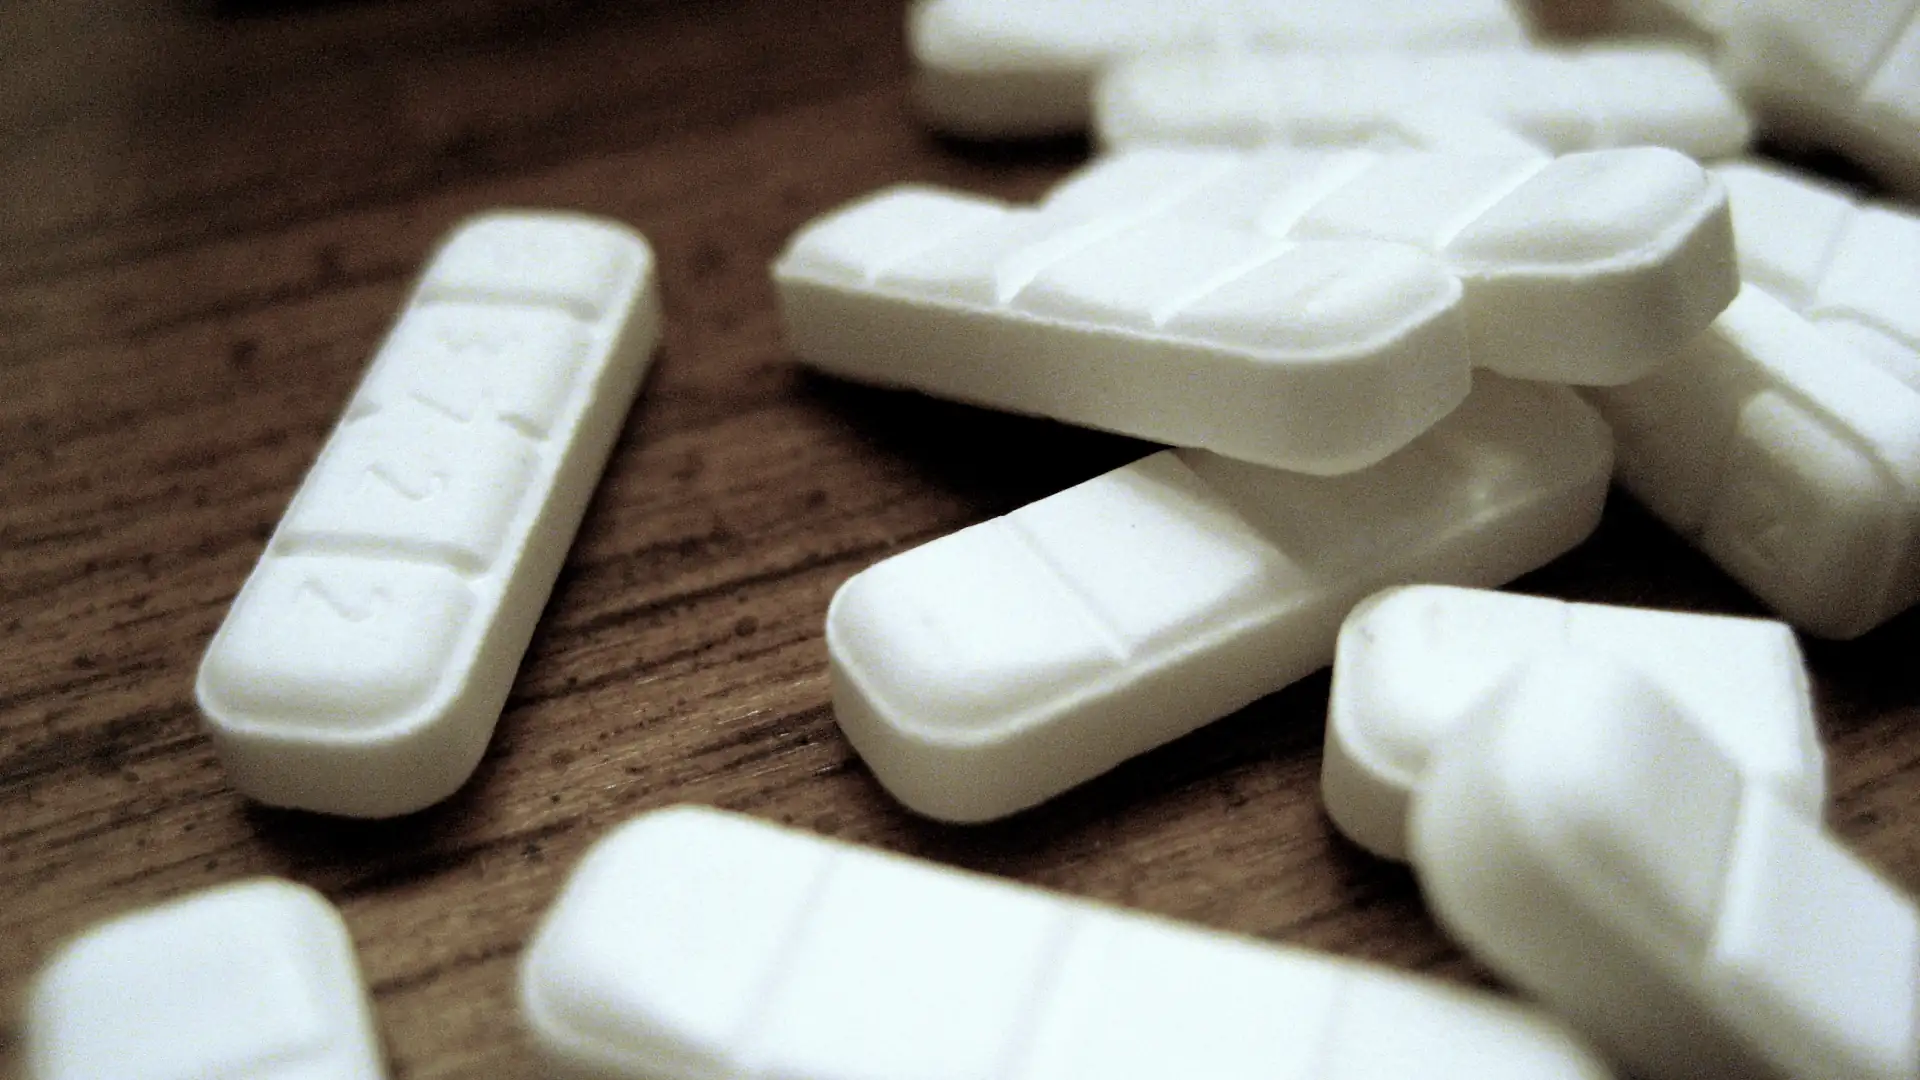 Buying Xanax Online: What You Need to Know About Purchasing Anxiety Medication